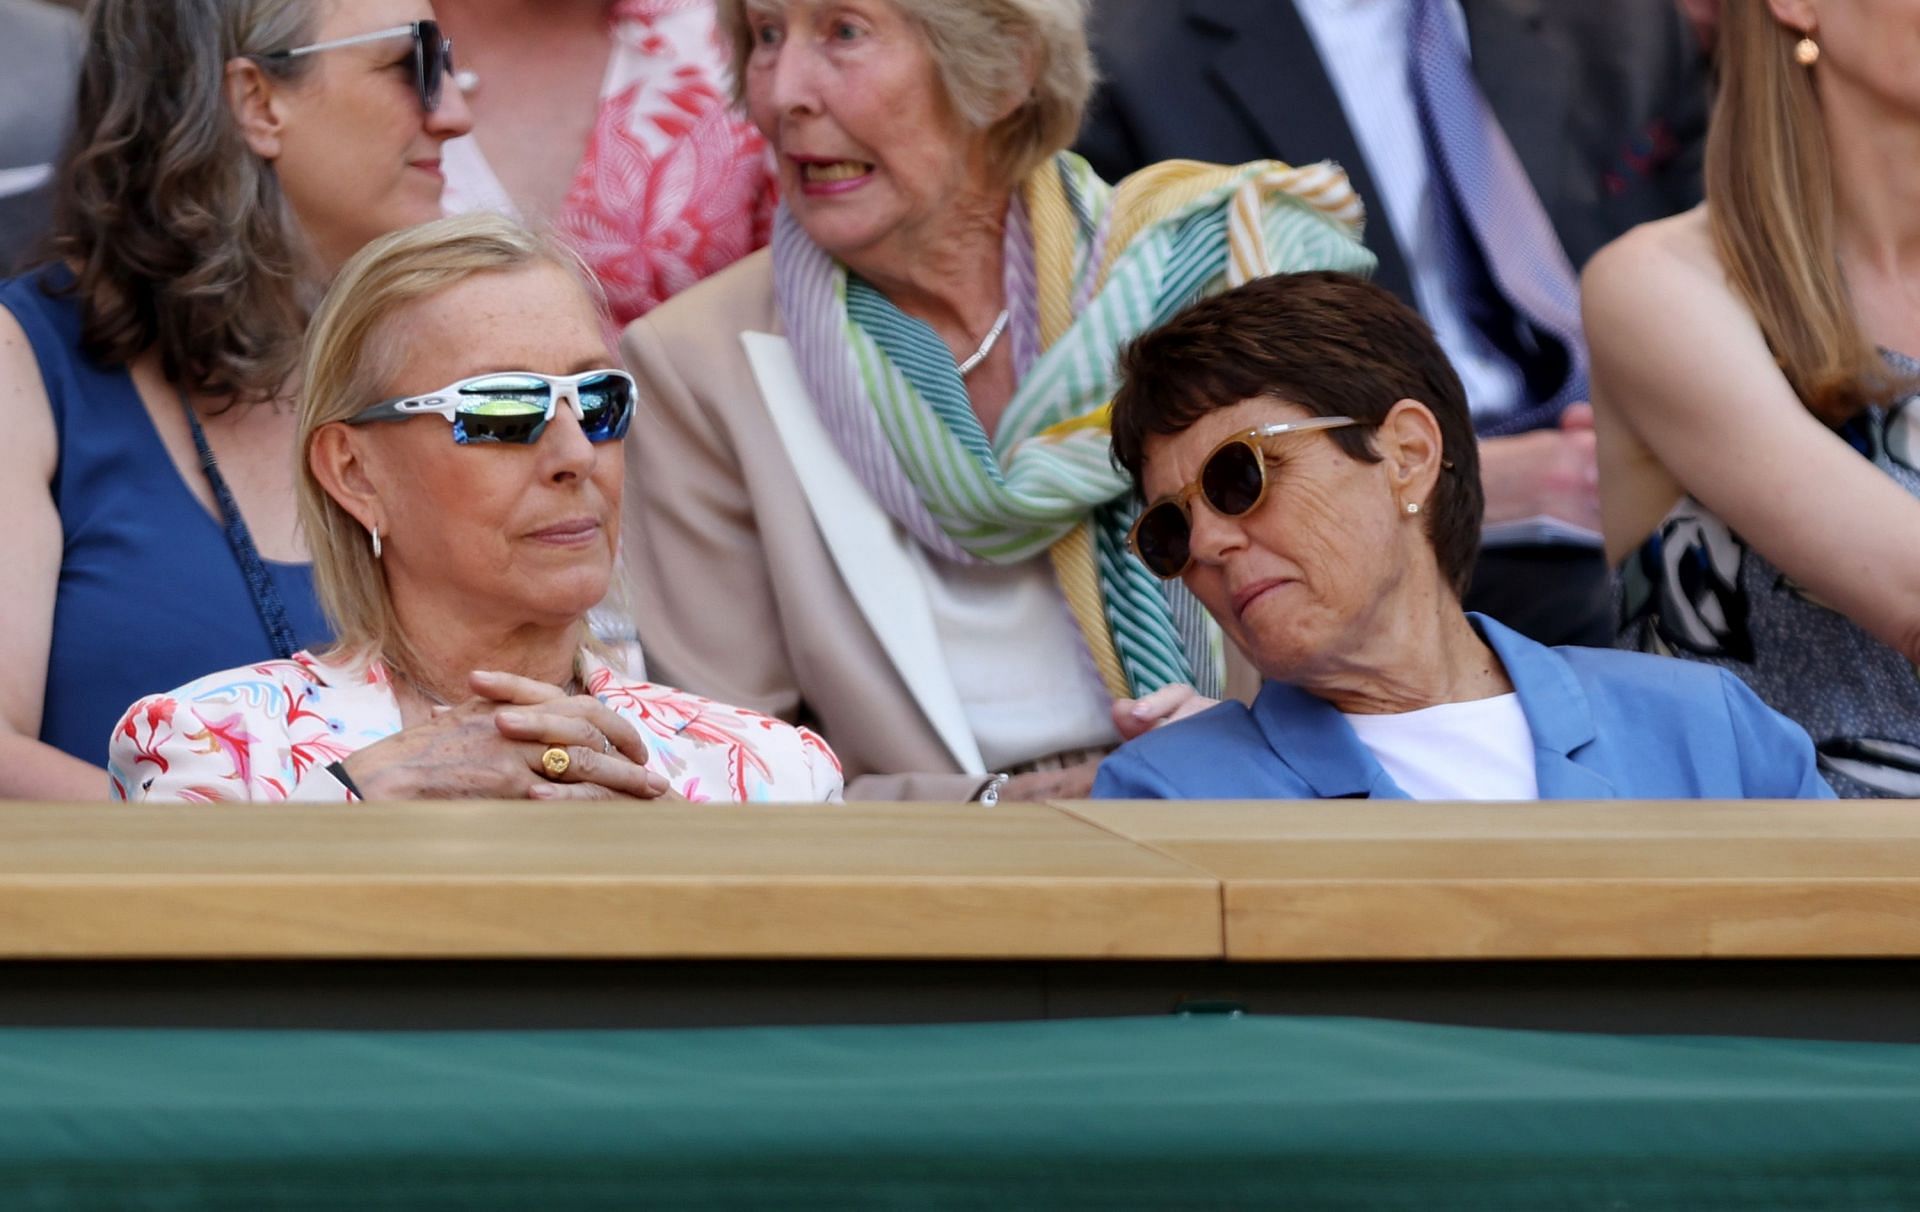 Navratilova at Wimbledon, The Championships, earlier this year. (Image: Getty Images)